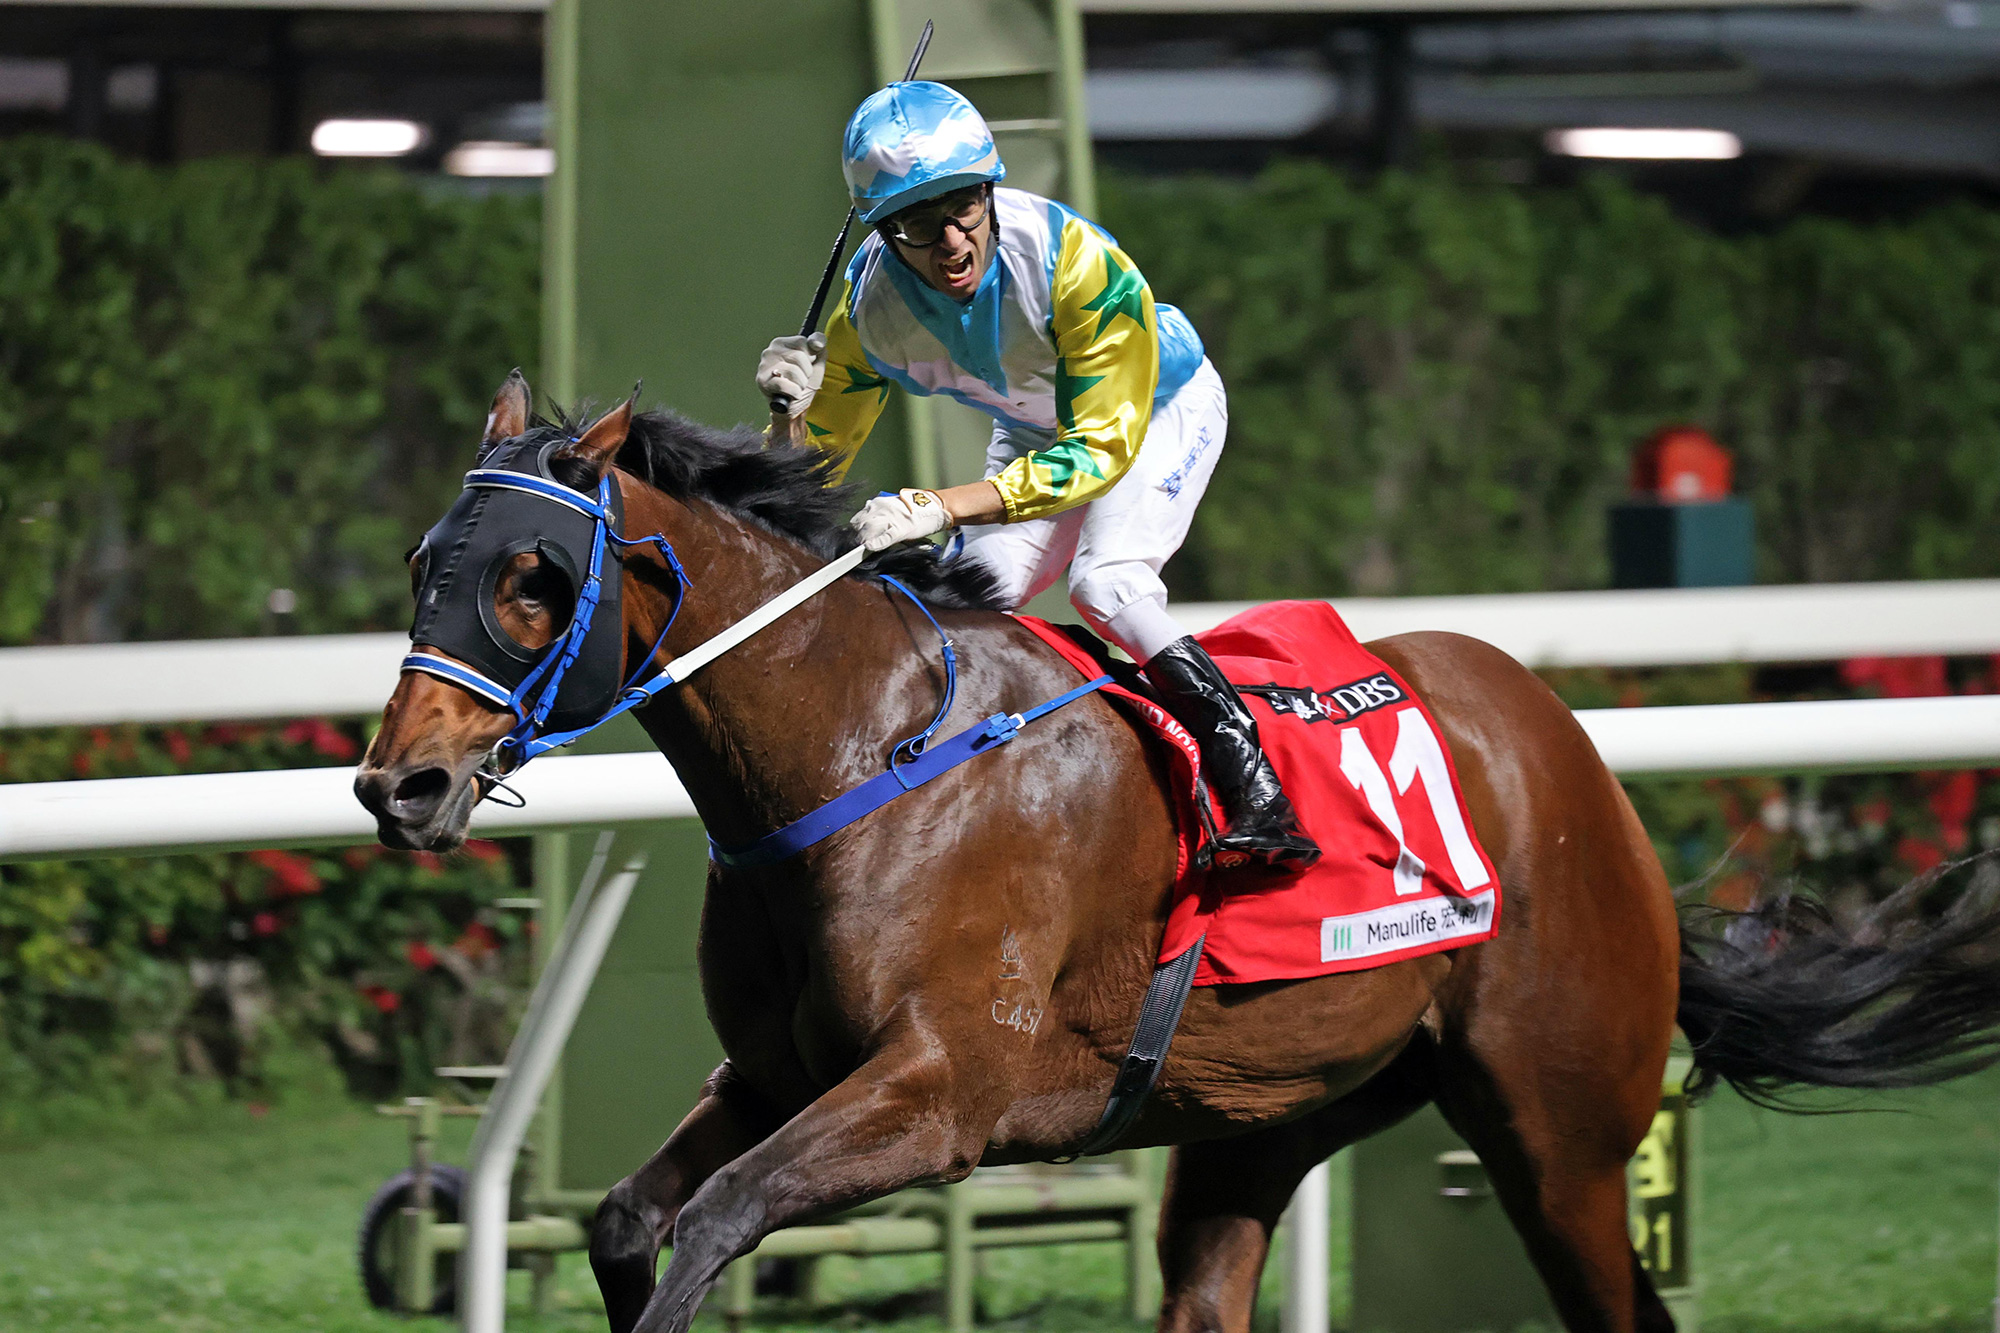 Joao Moreira continues his stunning form.